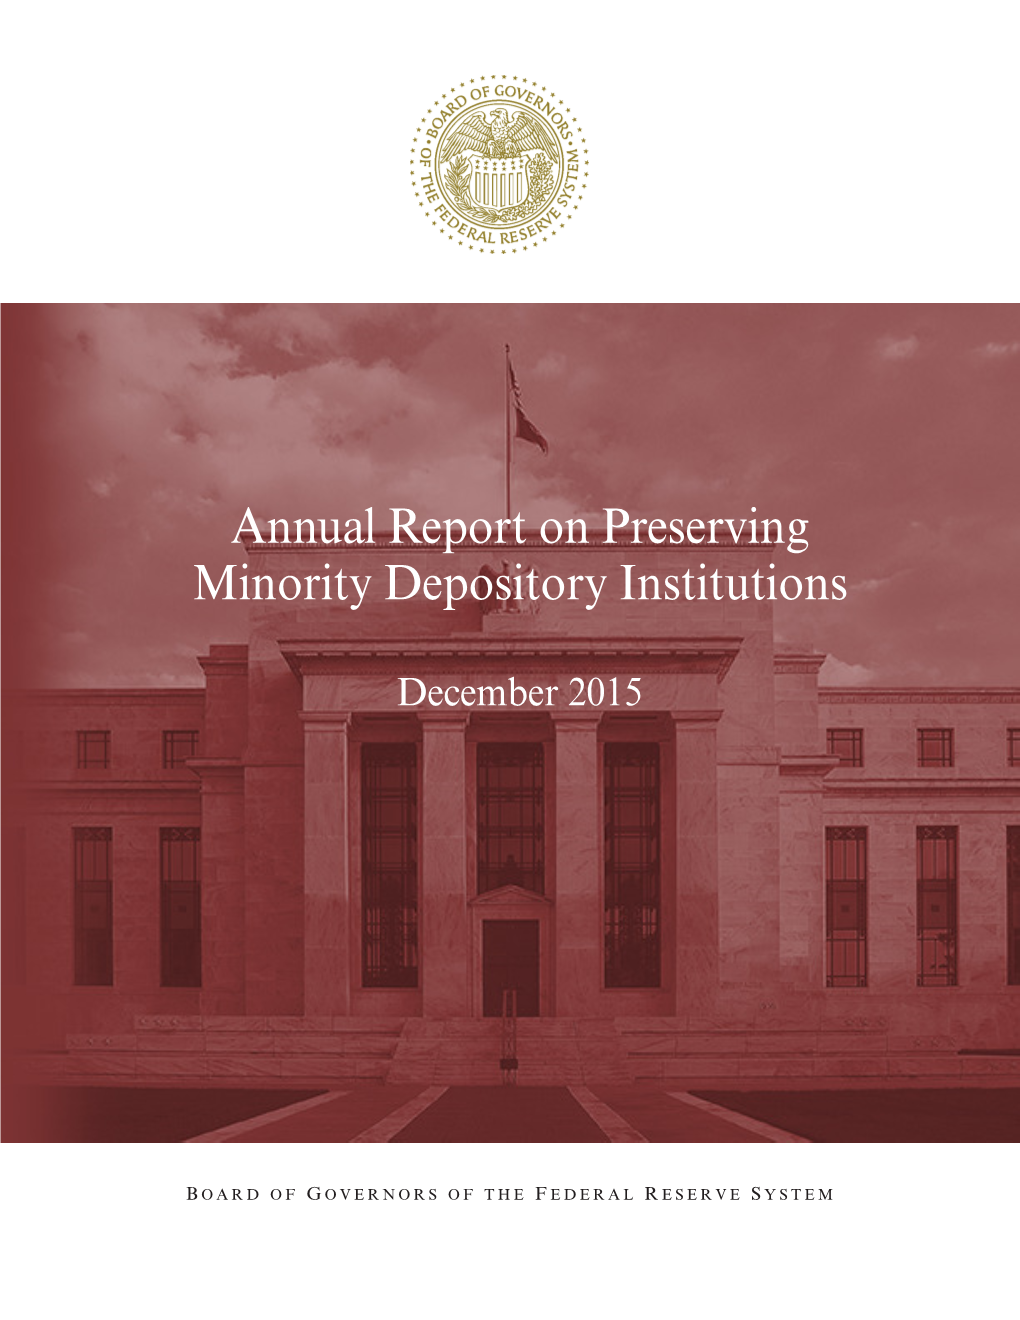 Annual Report on Preserving Minority Depository Institutions